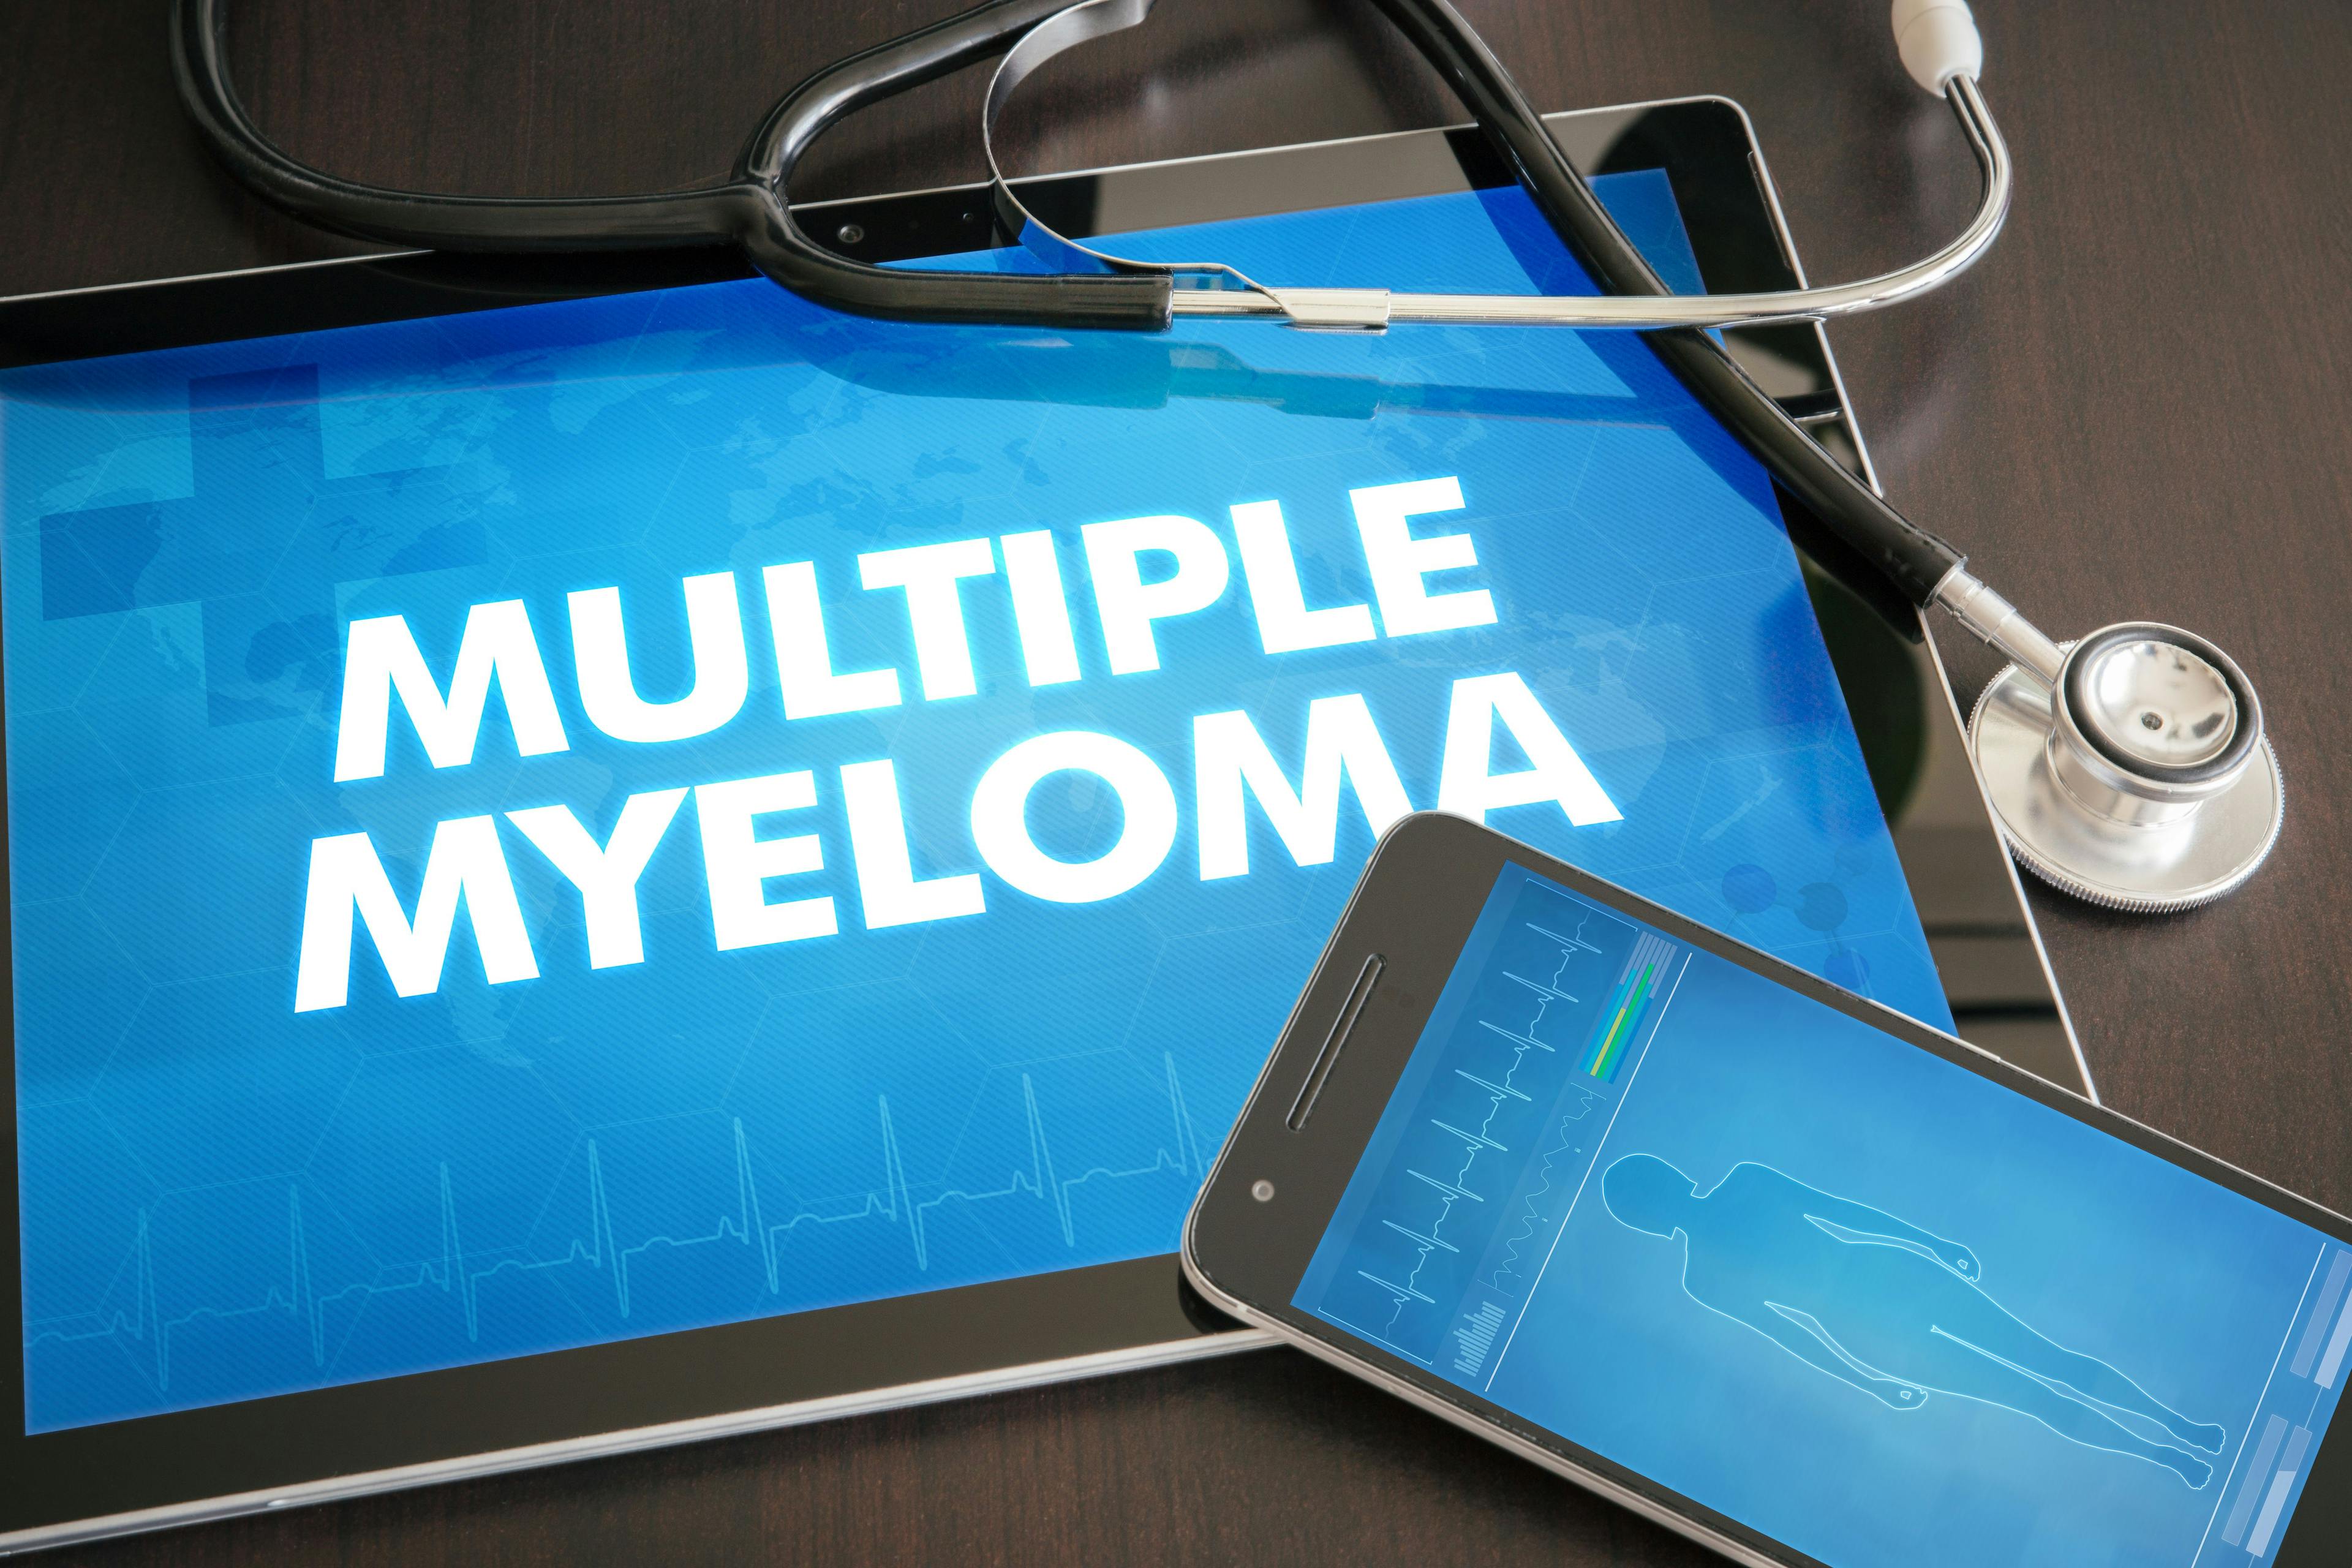 The Multiple Myeloma Treatment Pipeline and Specialty Pharmacy